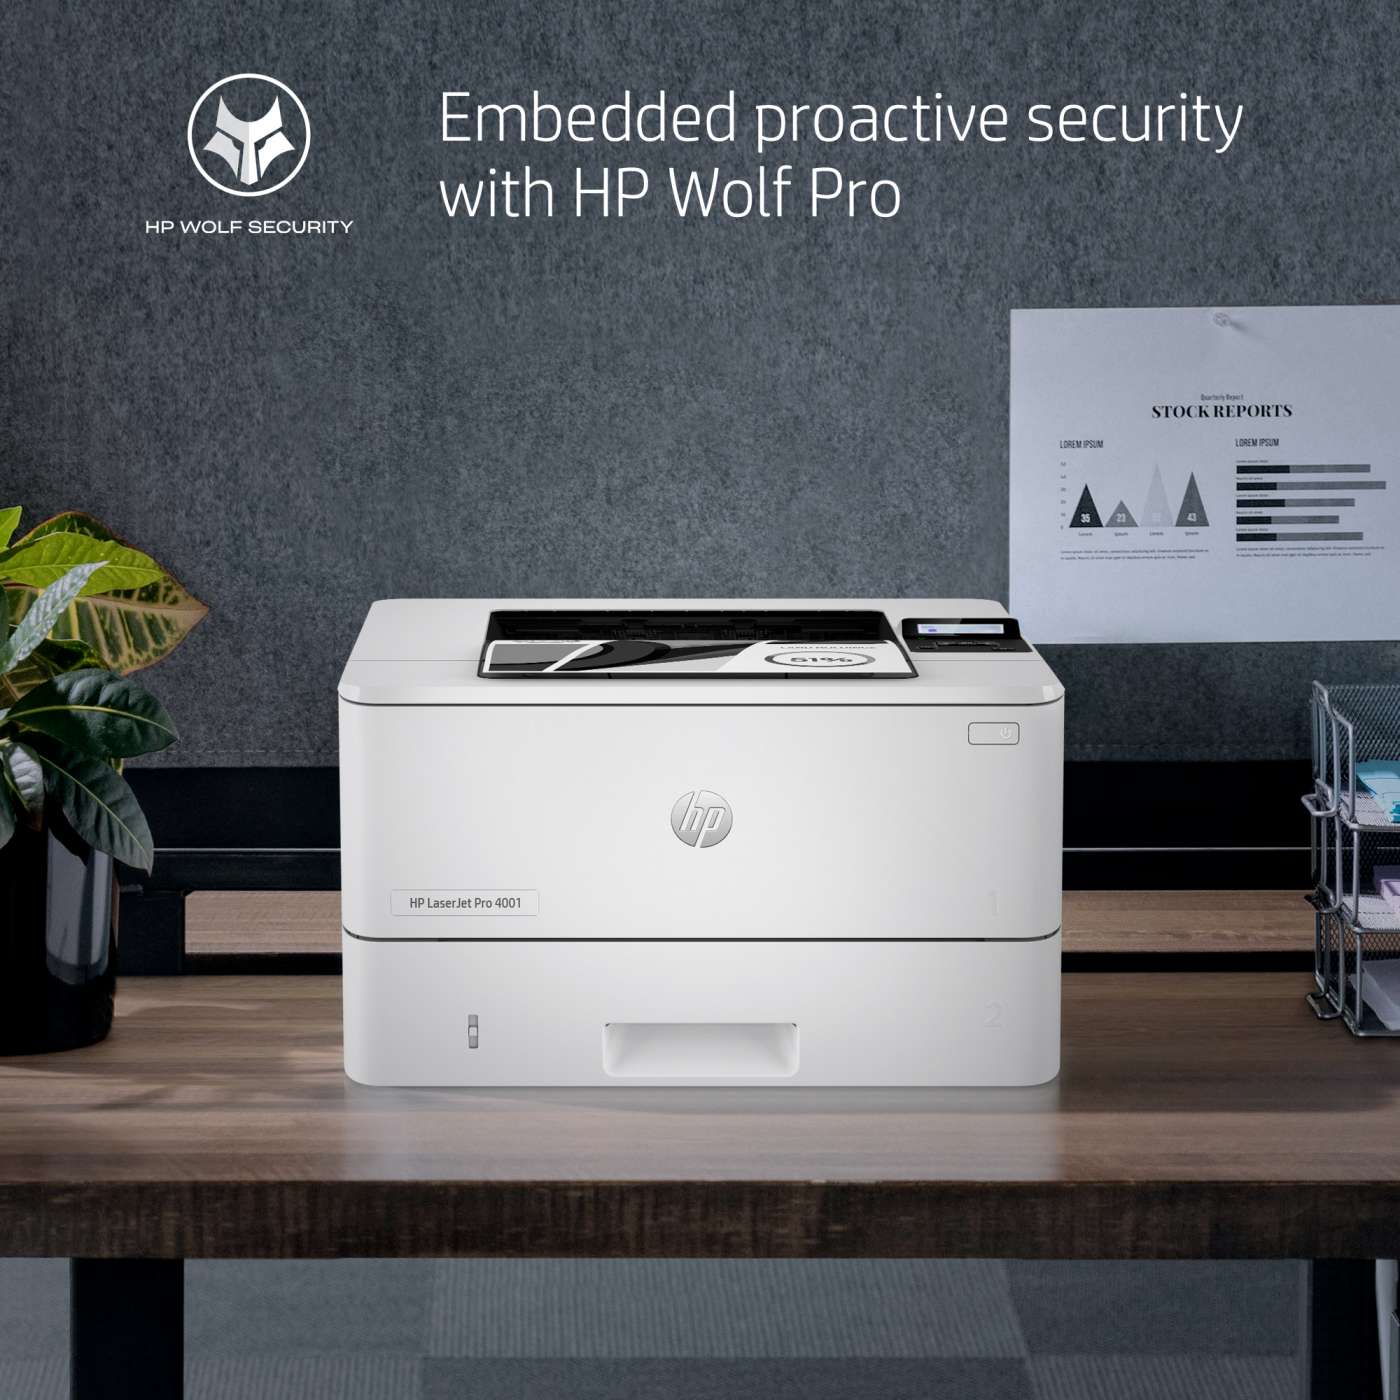 Are you confident with your #printsecurity? One unseen break-in can devastate your organization. Reply to hear from one of our experts in @HP Wolf Pro Security about how embedded, proactive security can help.